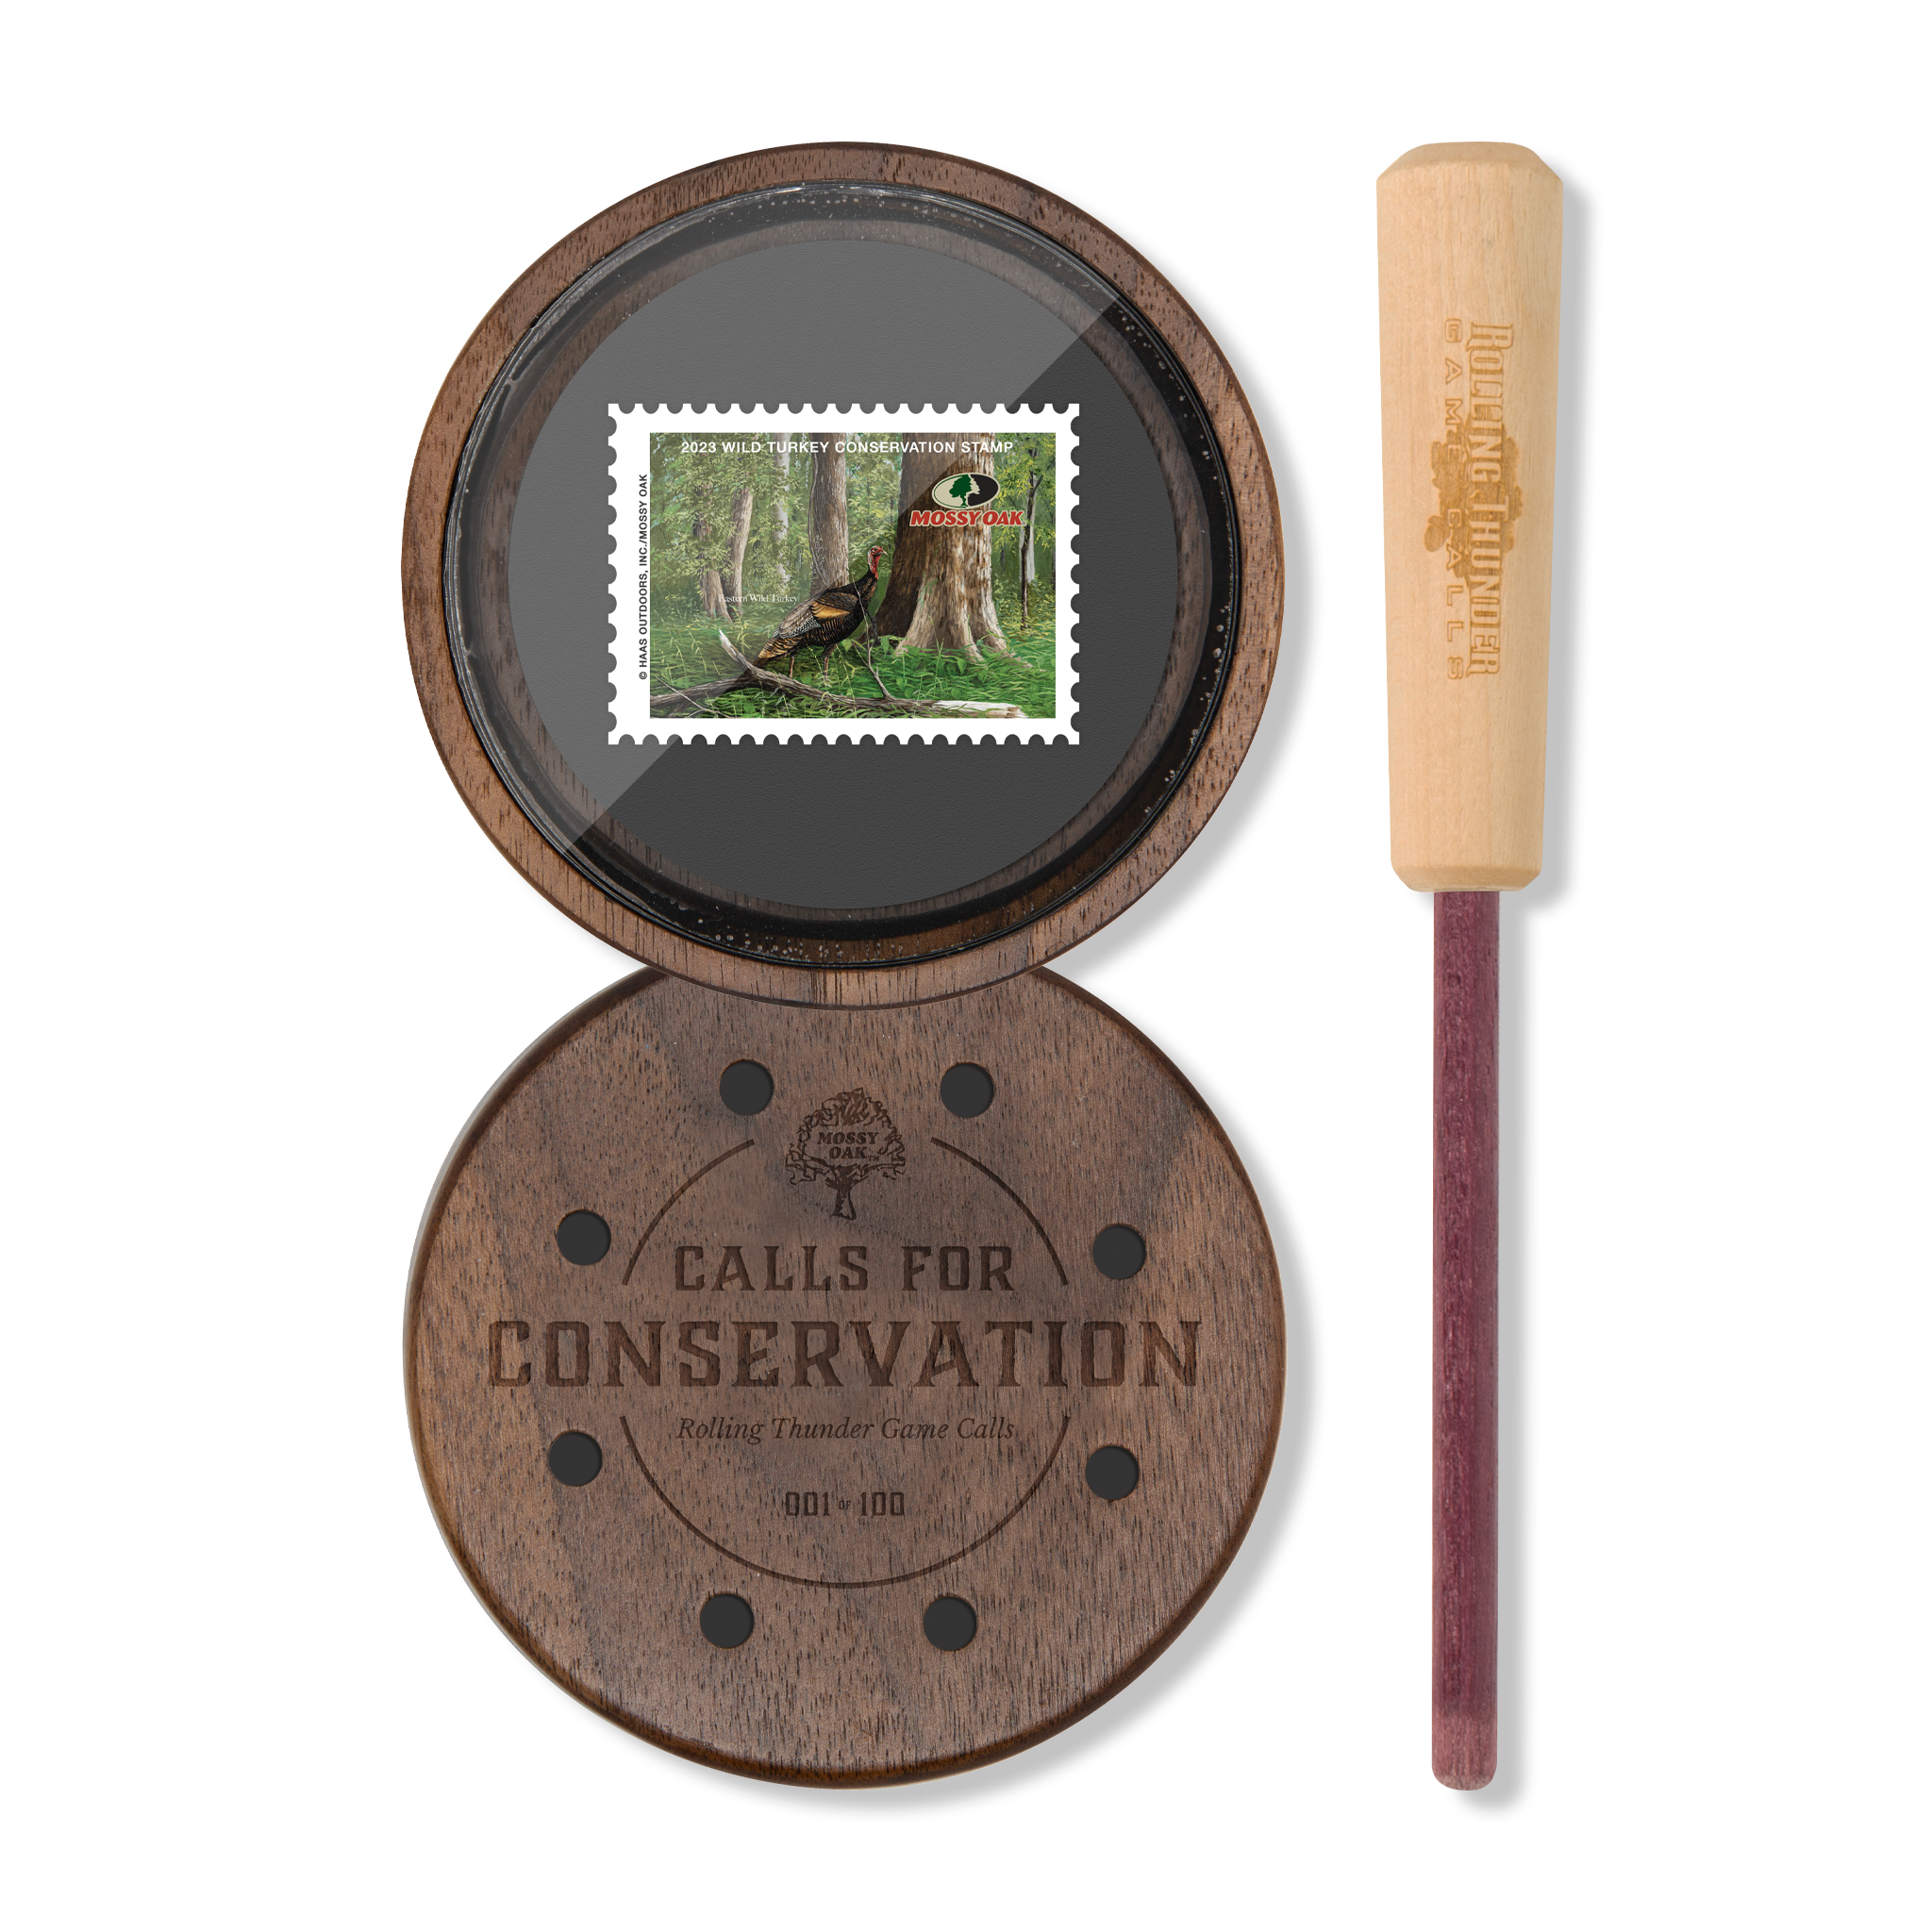 2nd Annual Calls for Conservation Turkey Stamp Pot Call